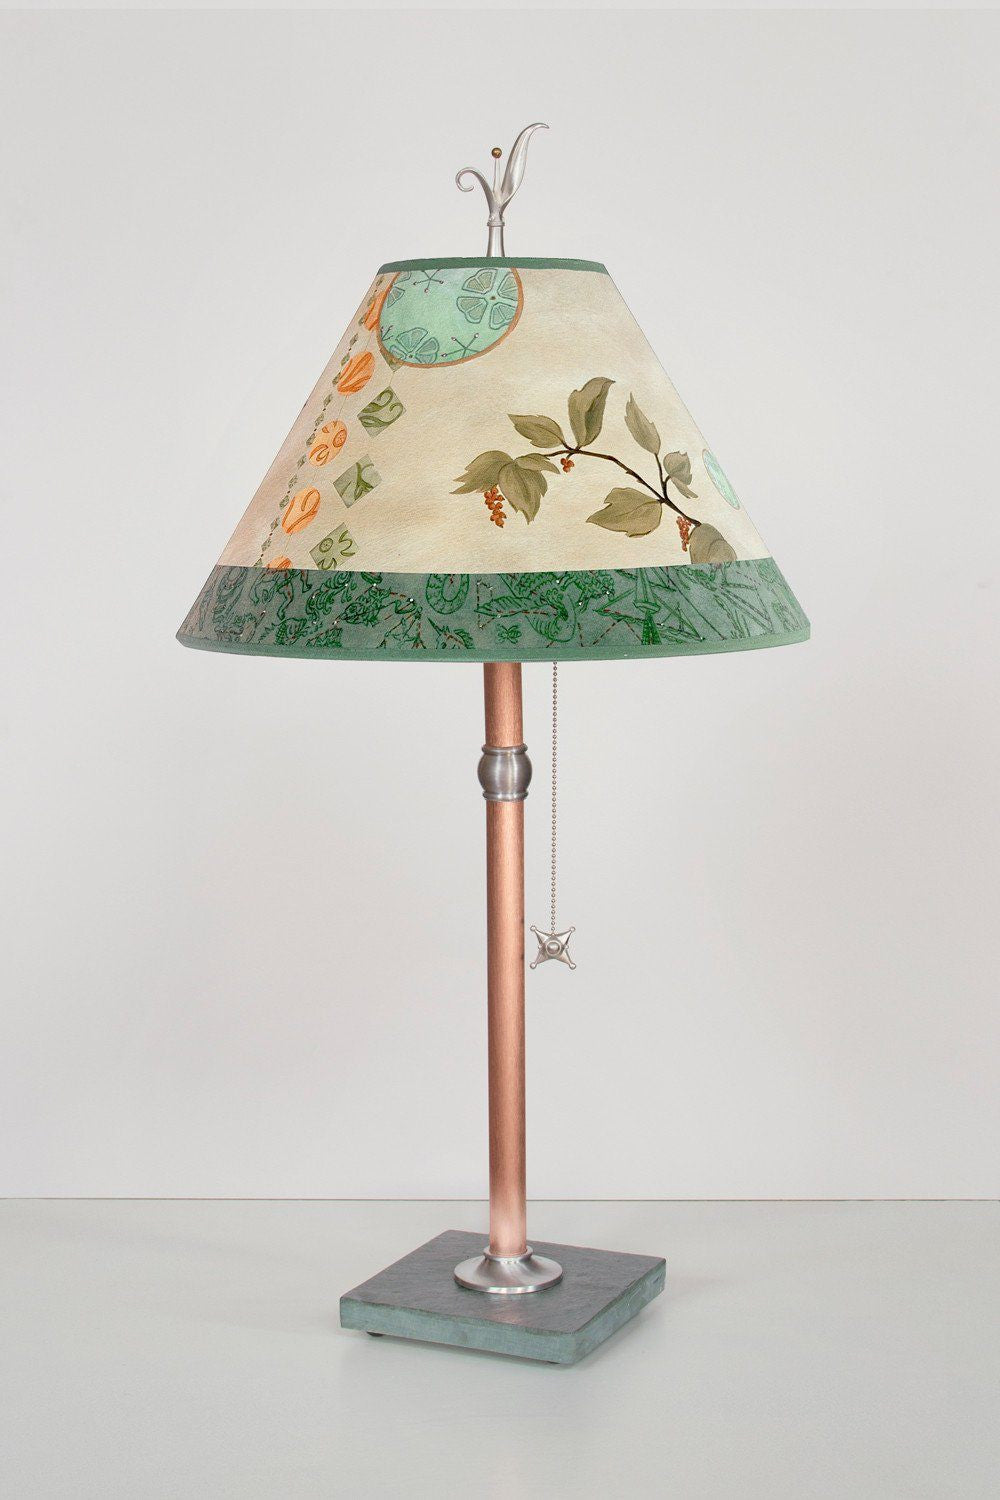 Janna Ugone &amp; Co Table Lamps Copper Table Lamp with Medium Conical Shade in Celestial Leaf